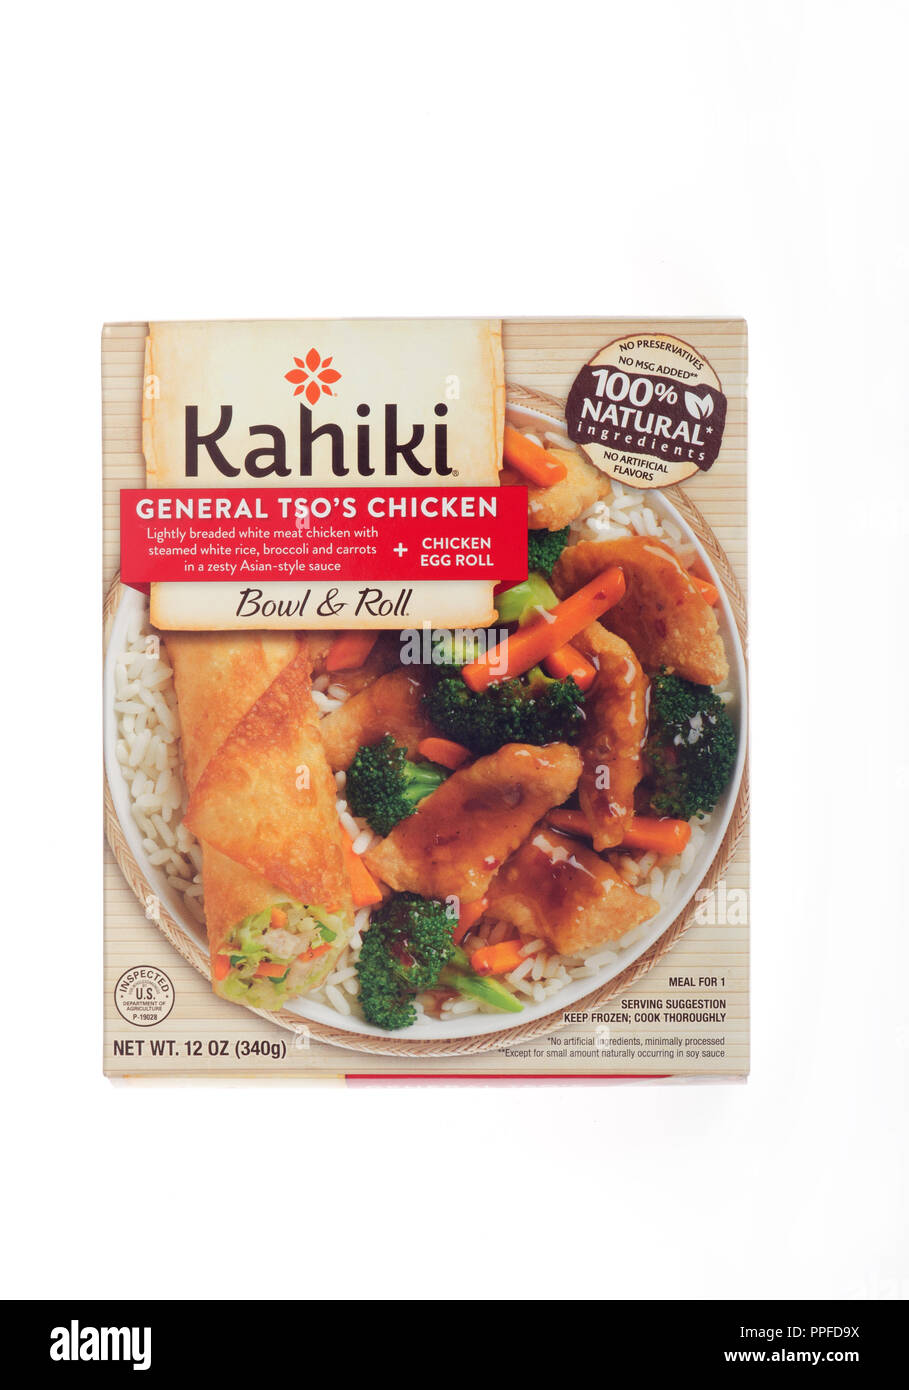 Box of frozen Kahiki General Tso’s Chicken with rice, carrots, broccoli and an egg roll in a bowl Stock Photo